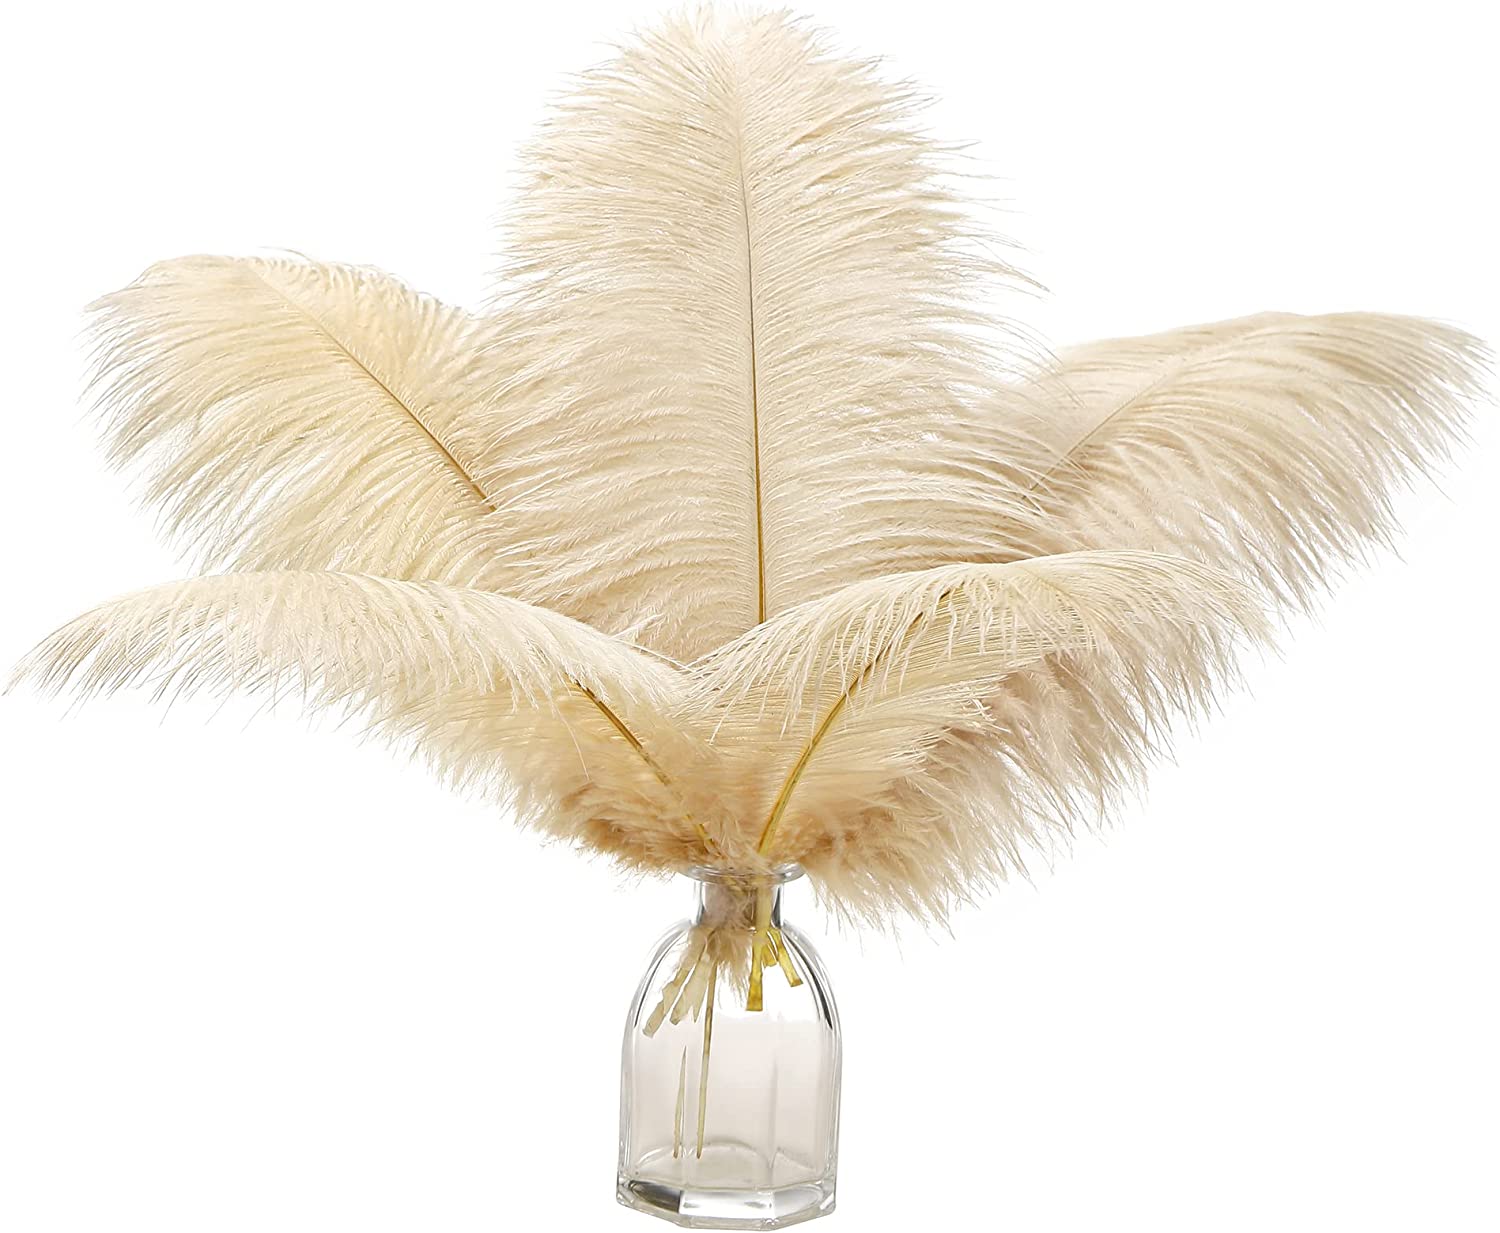  EVNNO 10 Pcs Natural White Ostrich Feathers Making Kit